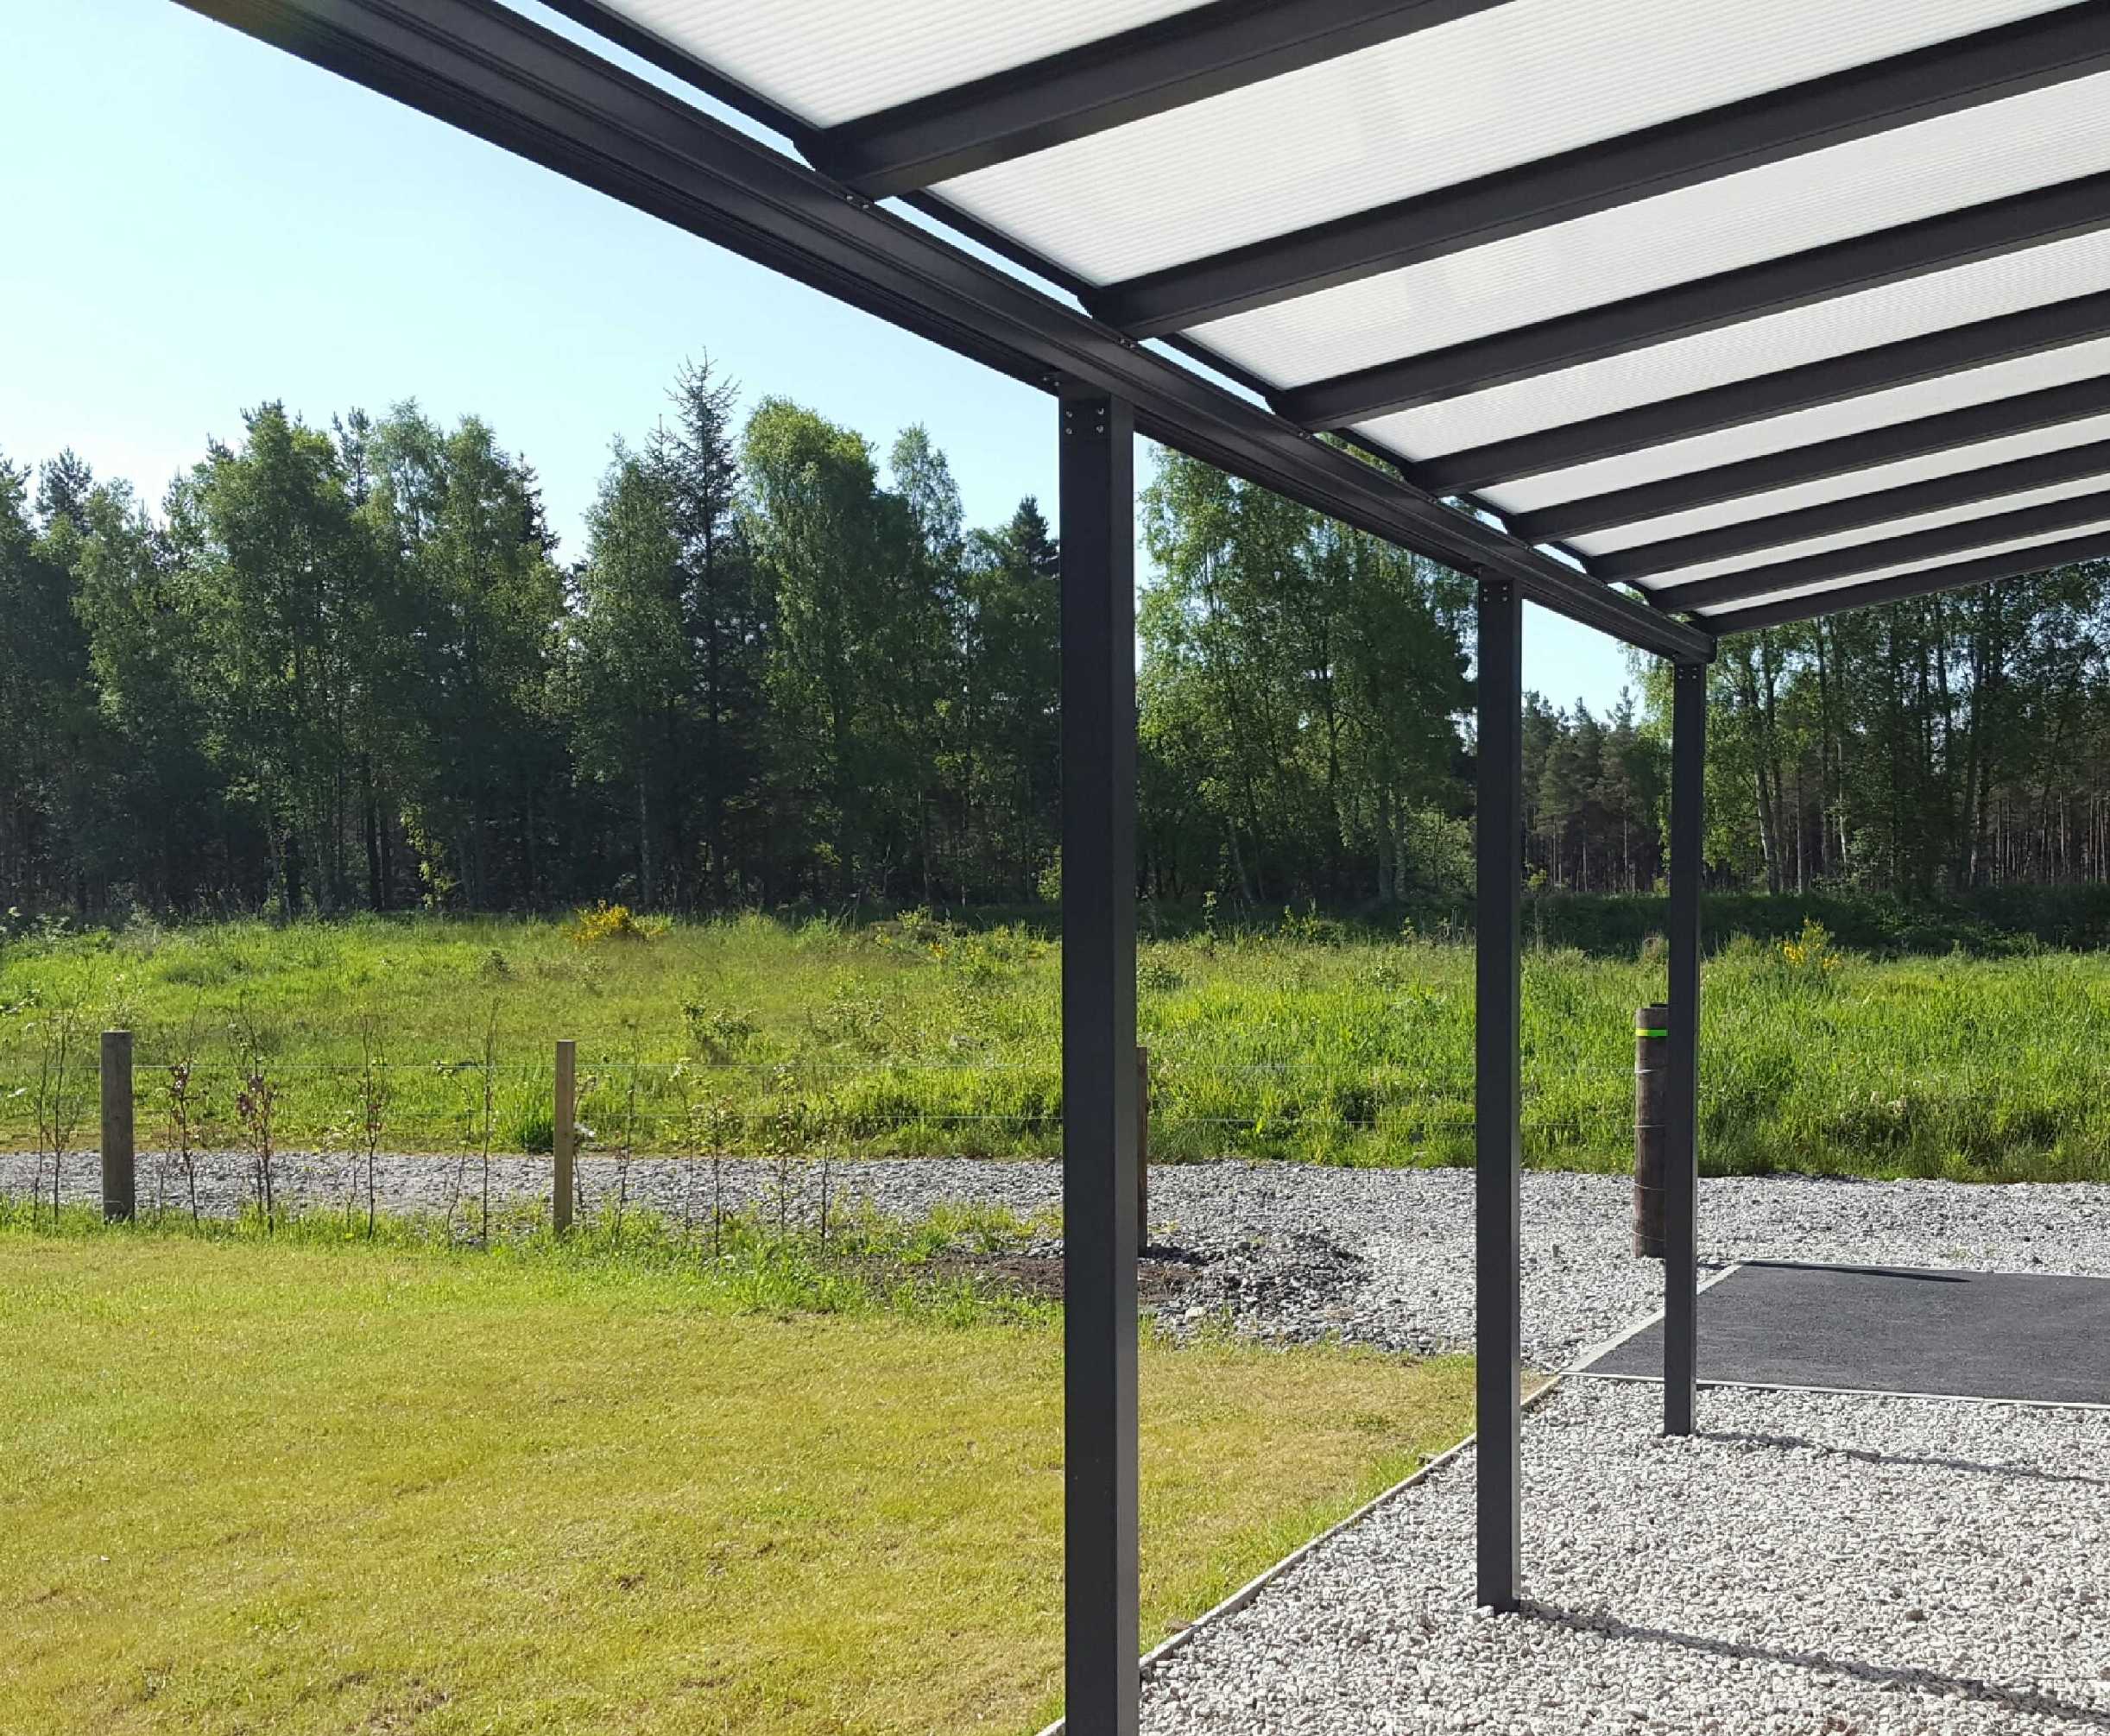 Omega Smart Lean-To Canopy, Anthracite Grey, 6mm Glass Clear Plate Polycarbonate Glazing - 9.1m (W) x 3.5m (P), (5) Supporting Posts